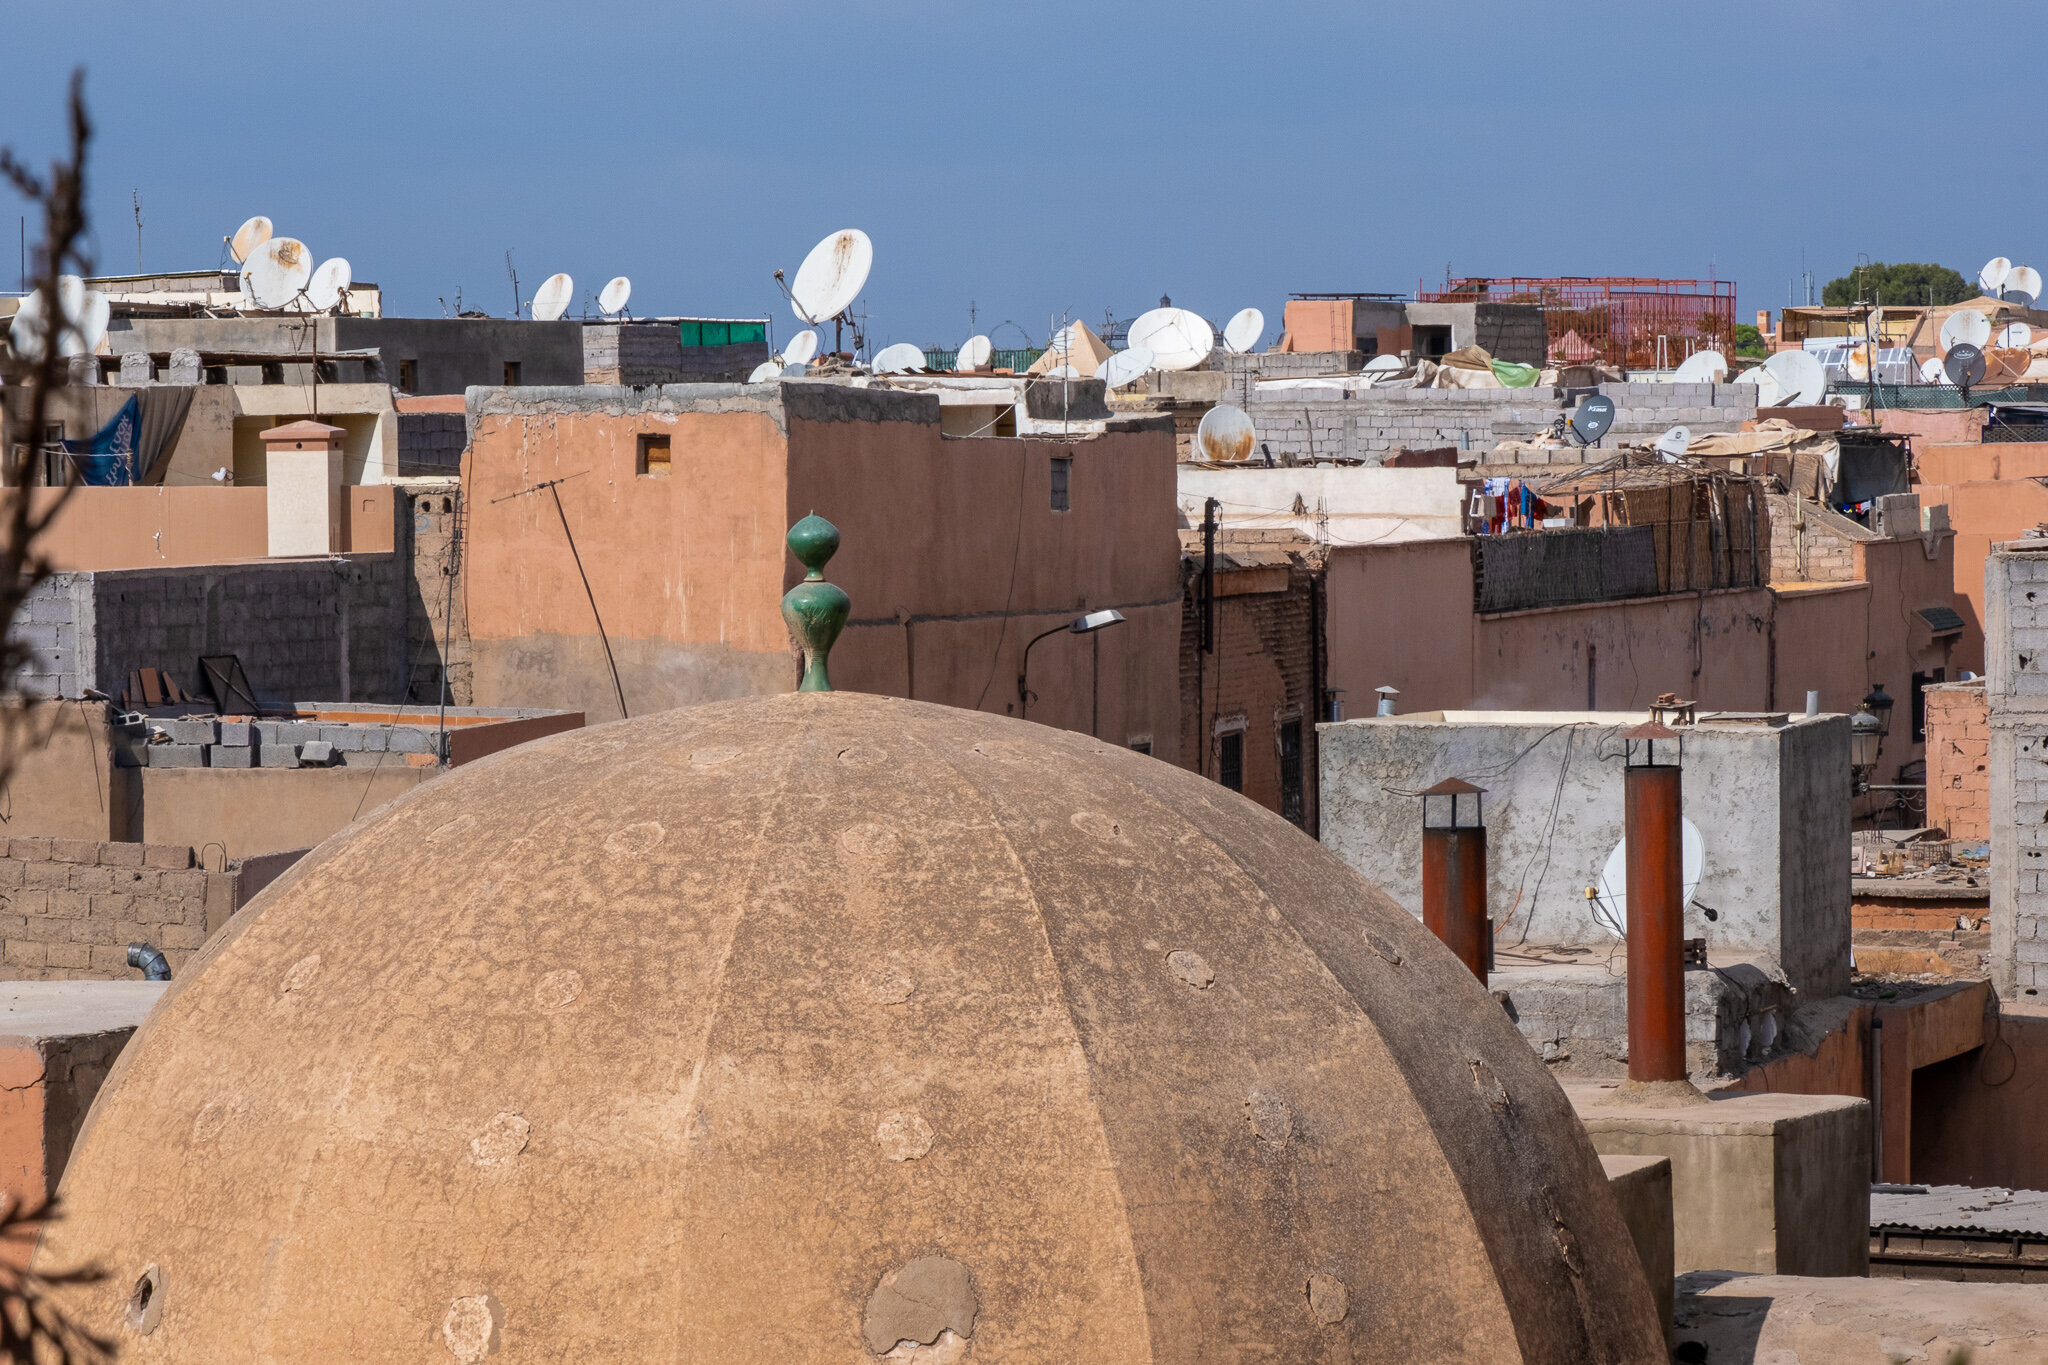 A Marrakesh rooftop view